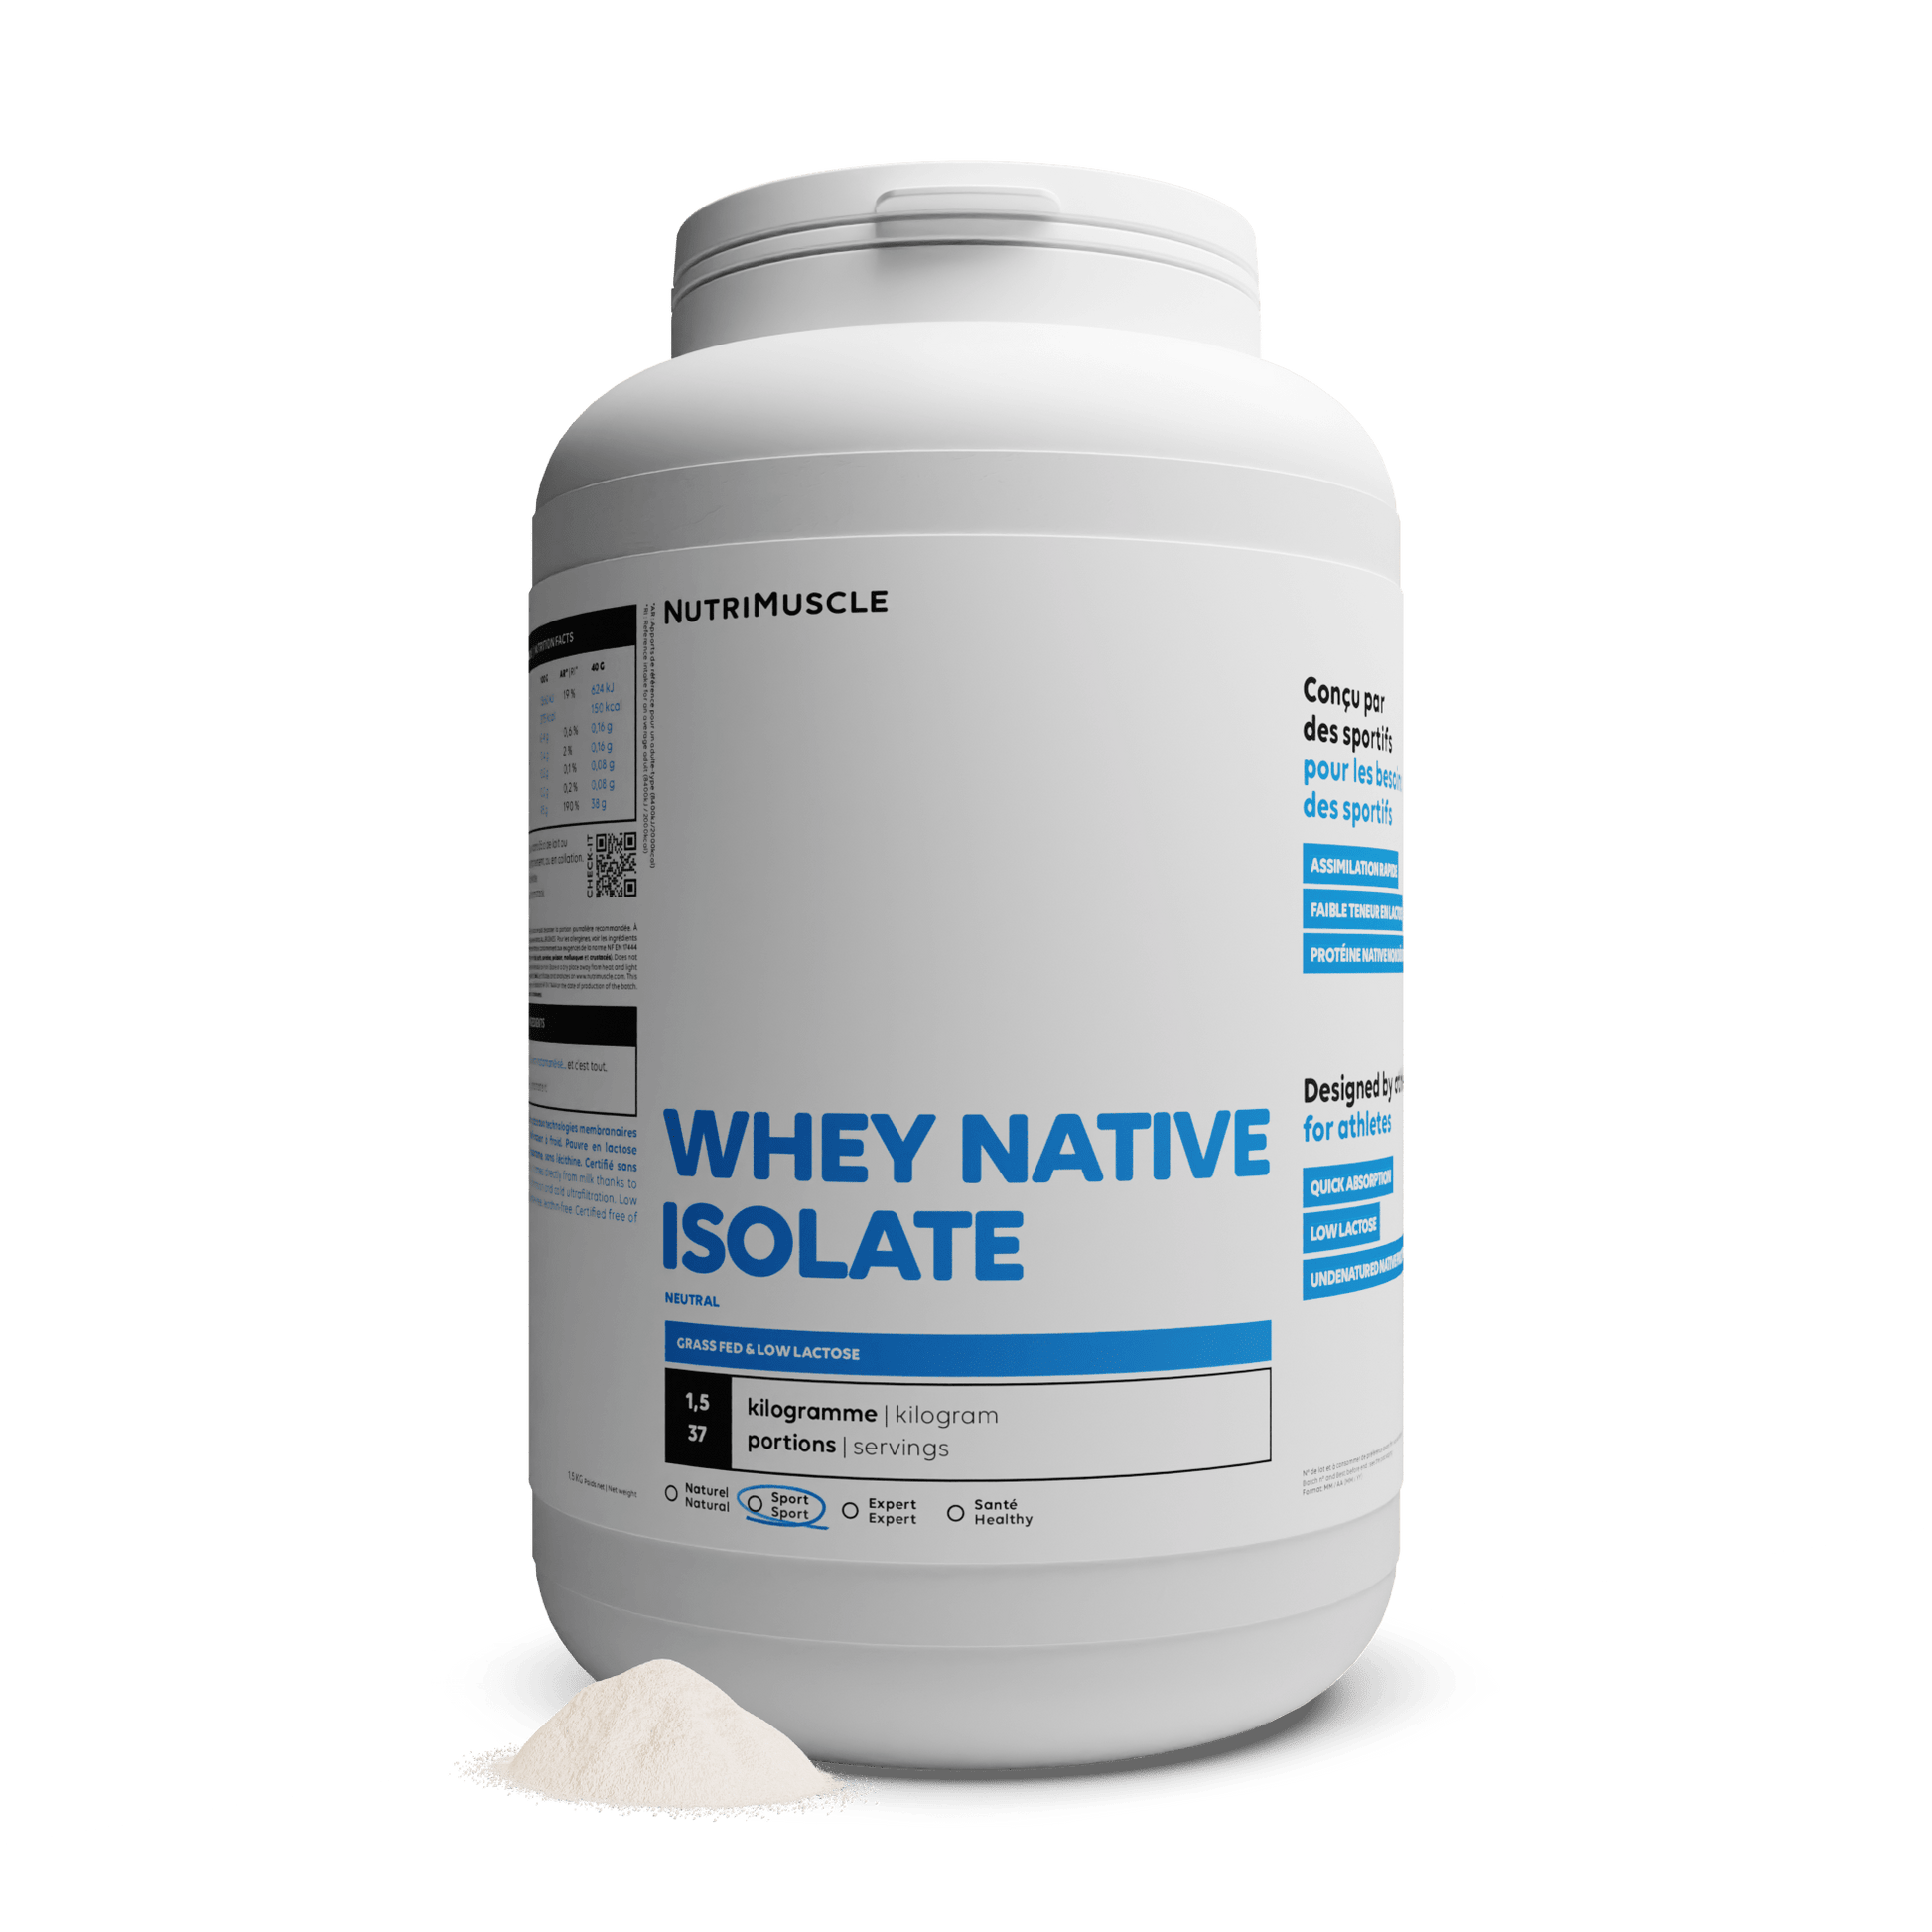 Nutrimuscle Protéines Nature / 1.50 kg Whey Native Isolate (Low lactose)